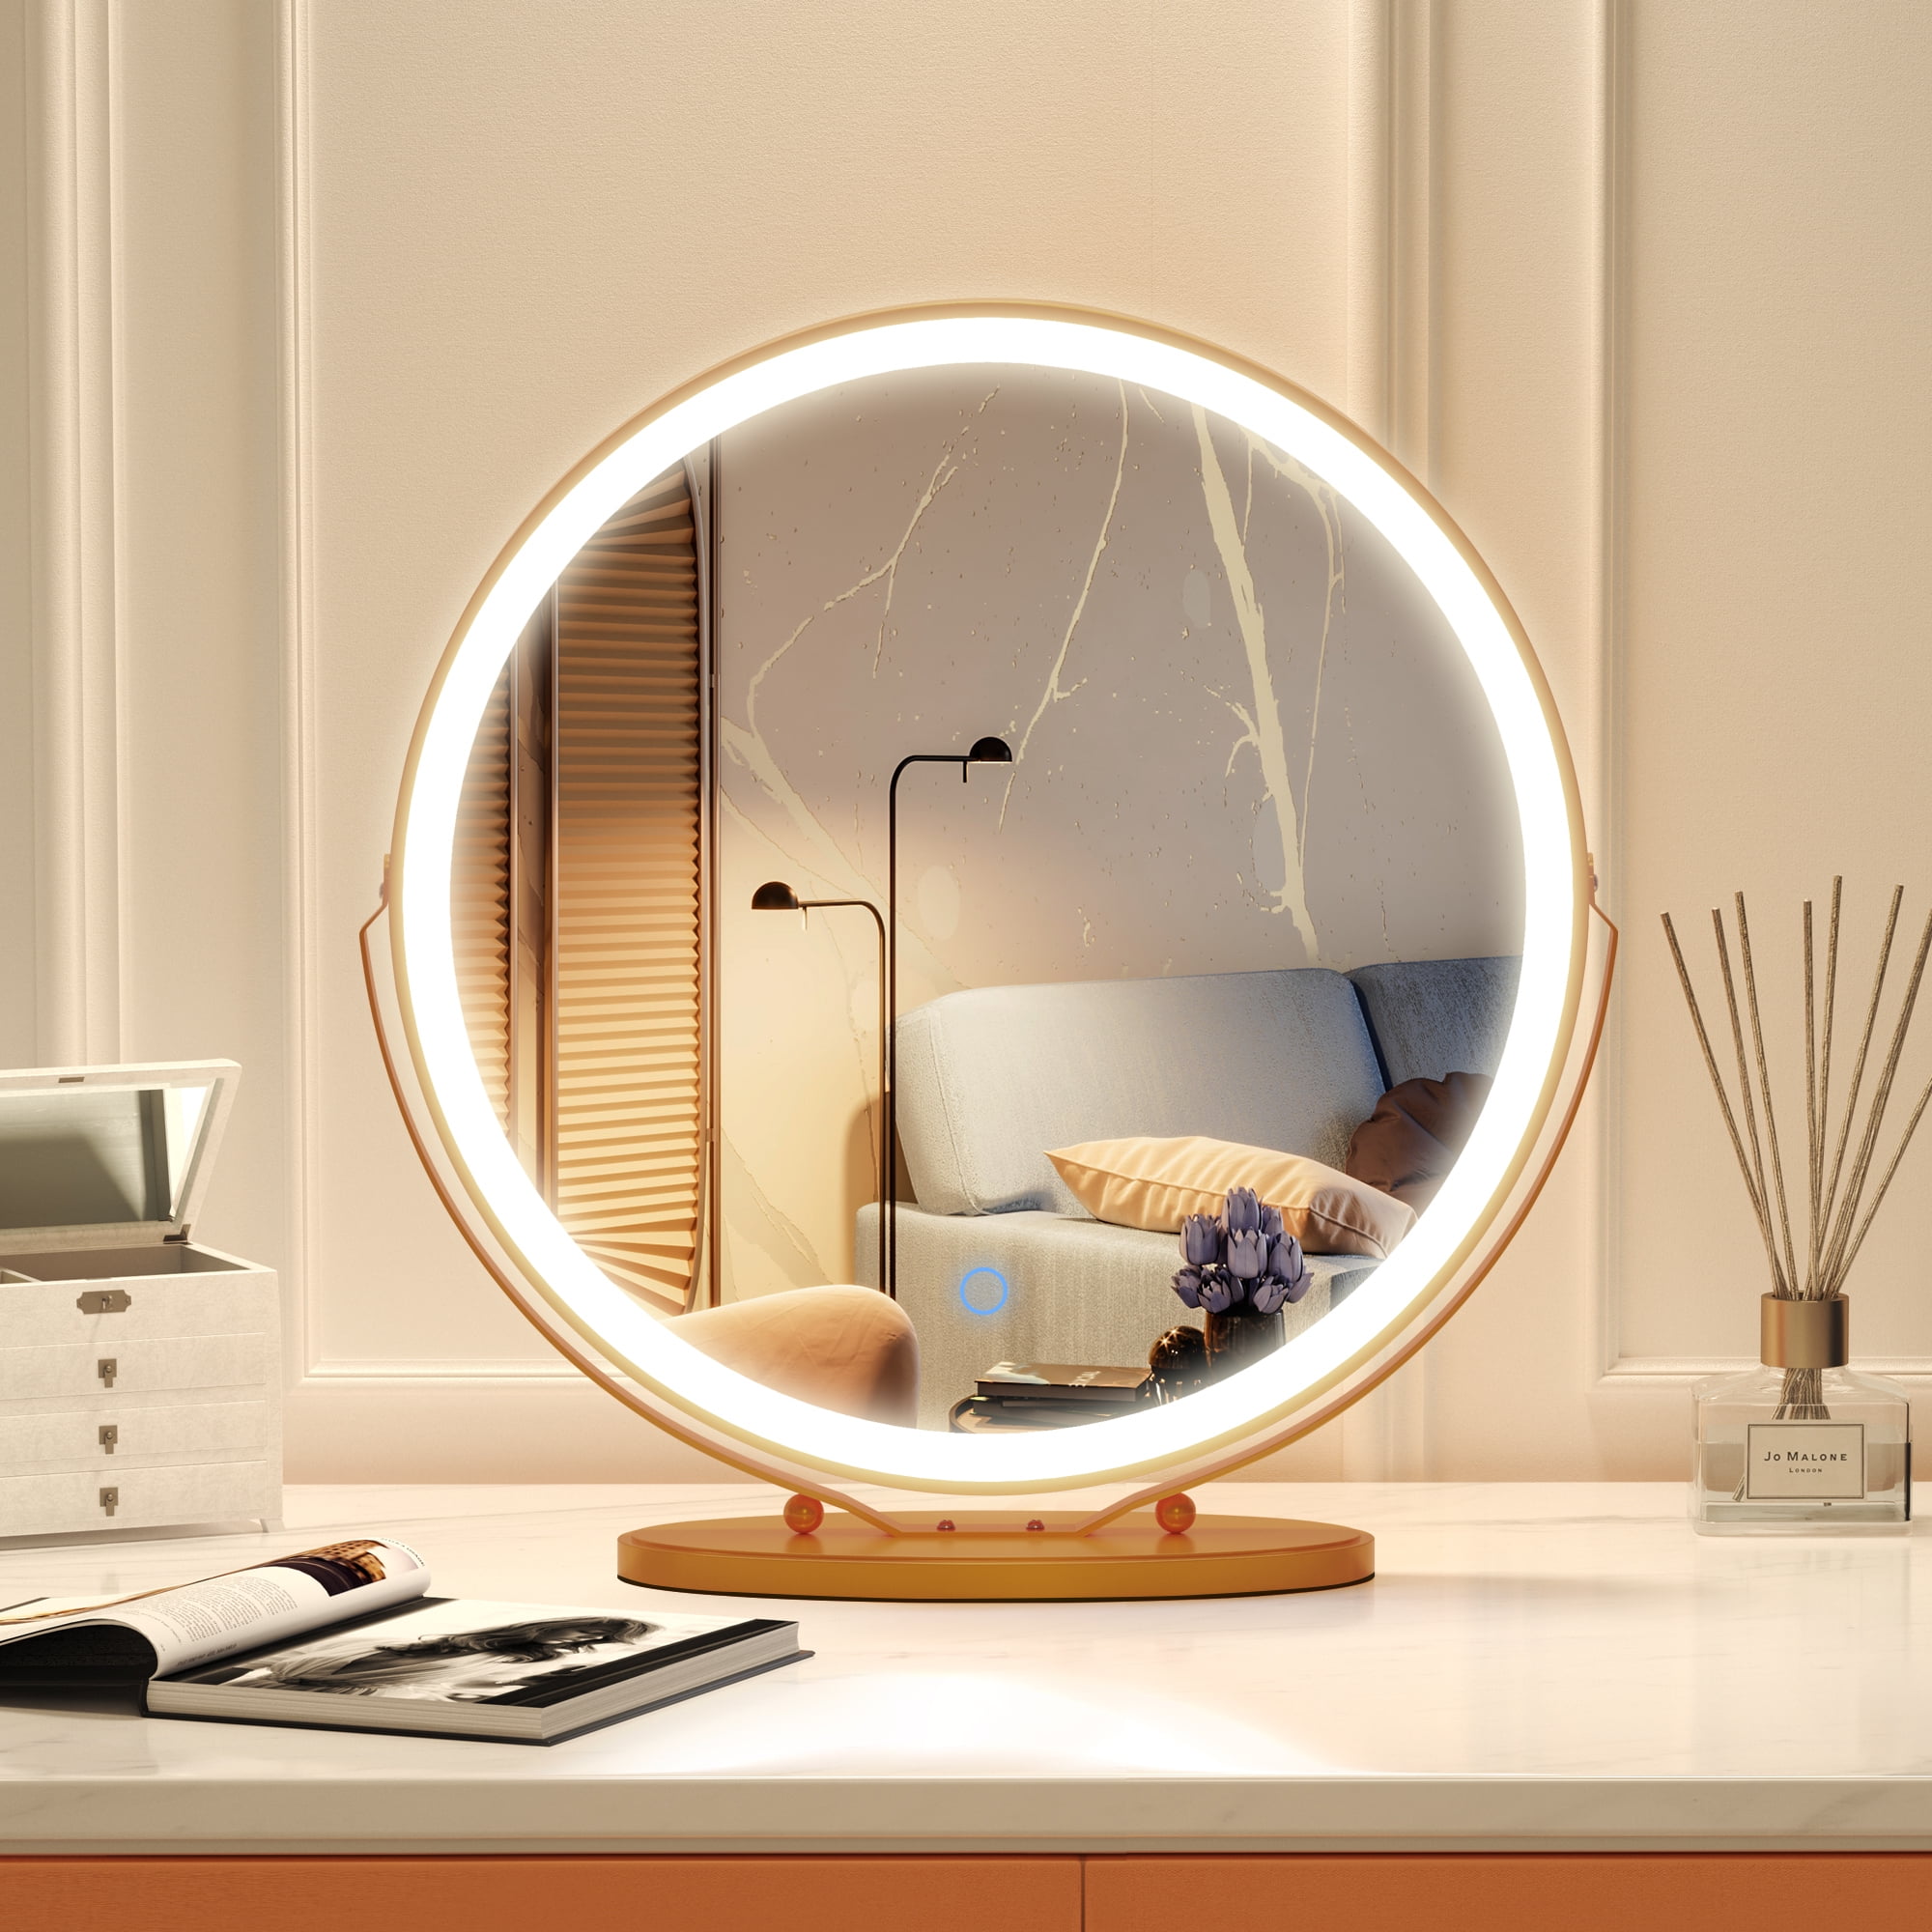 LVSOMT 20" Makeup Mirror with Lights, 3 Color Dimmable LED Mirror, Touch Control, 360°Rotation, High-Definition Large Round Lighted Up Mirror for Bedroom Table Desk, Yellow - Walmart.com